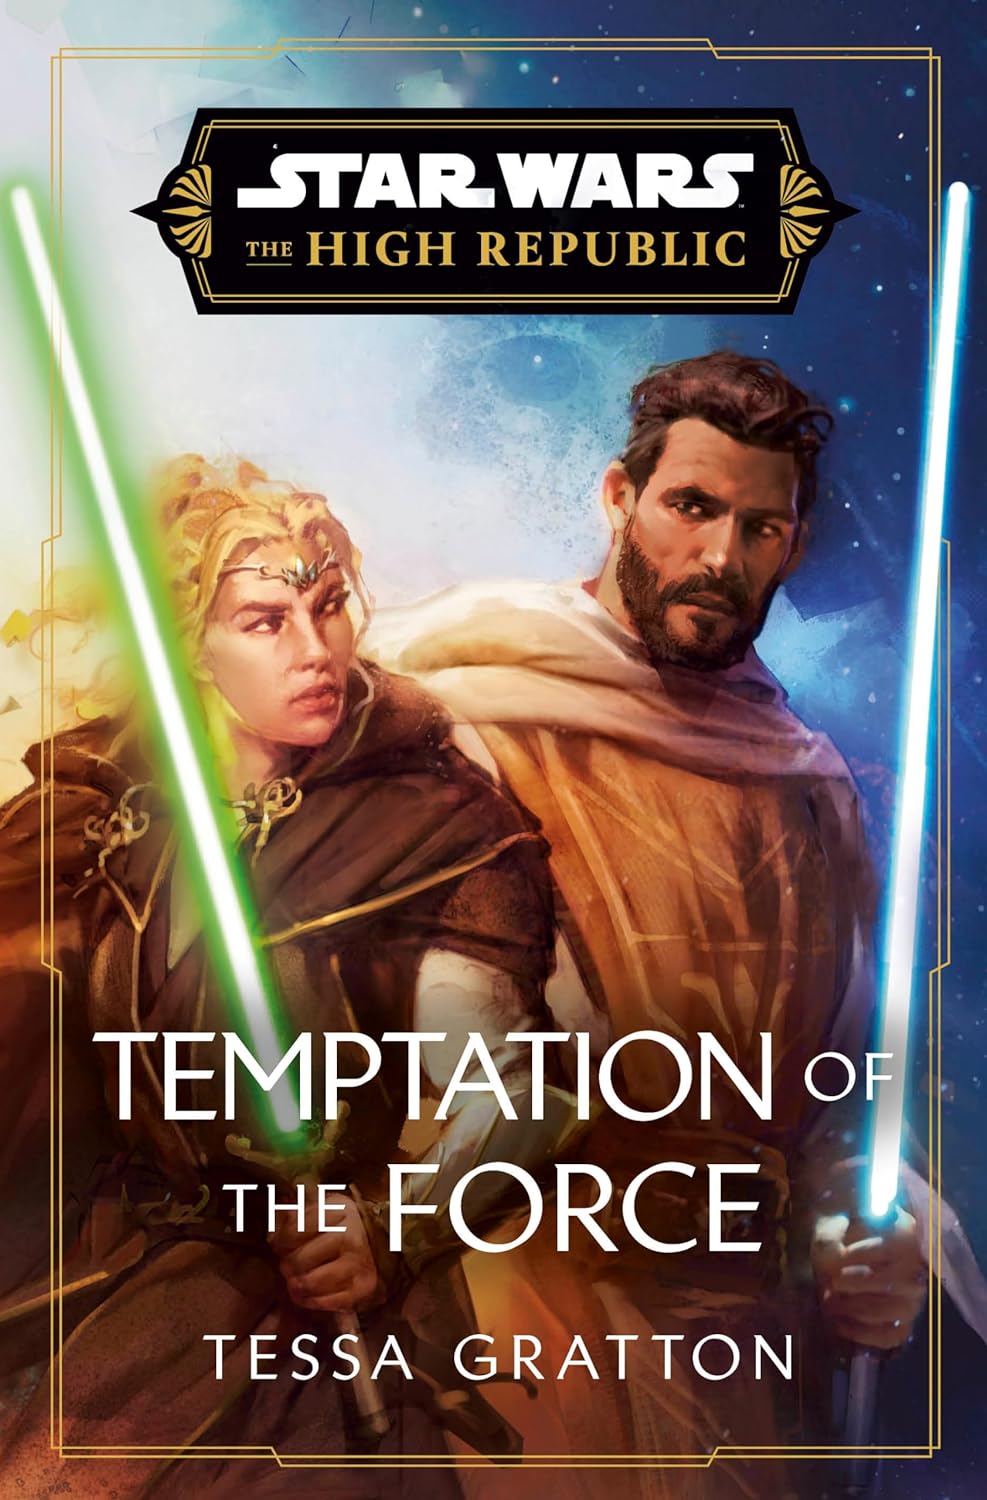 Temptation of the Force, by Tessa Gratton